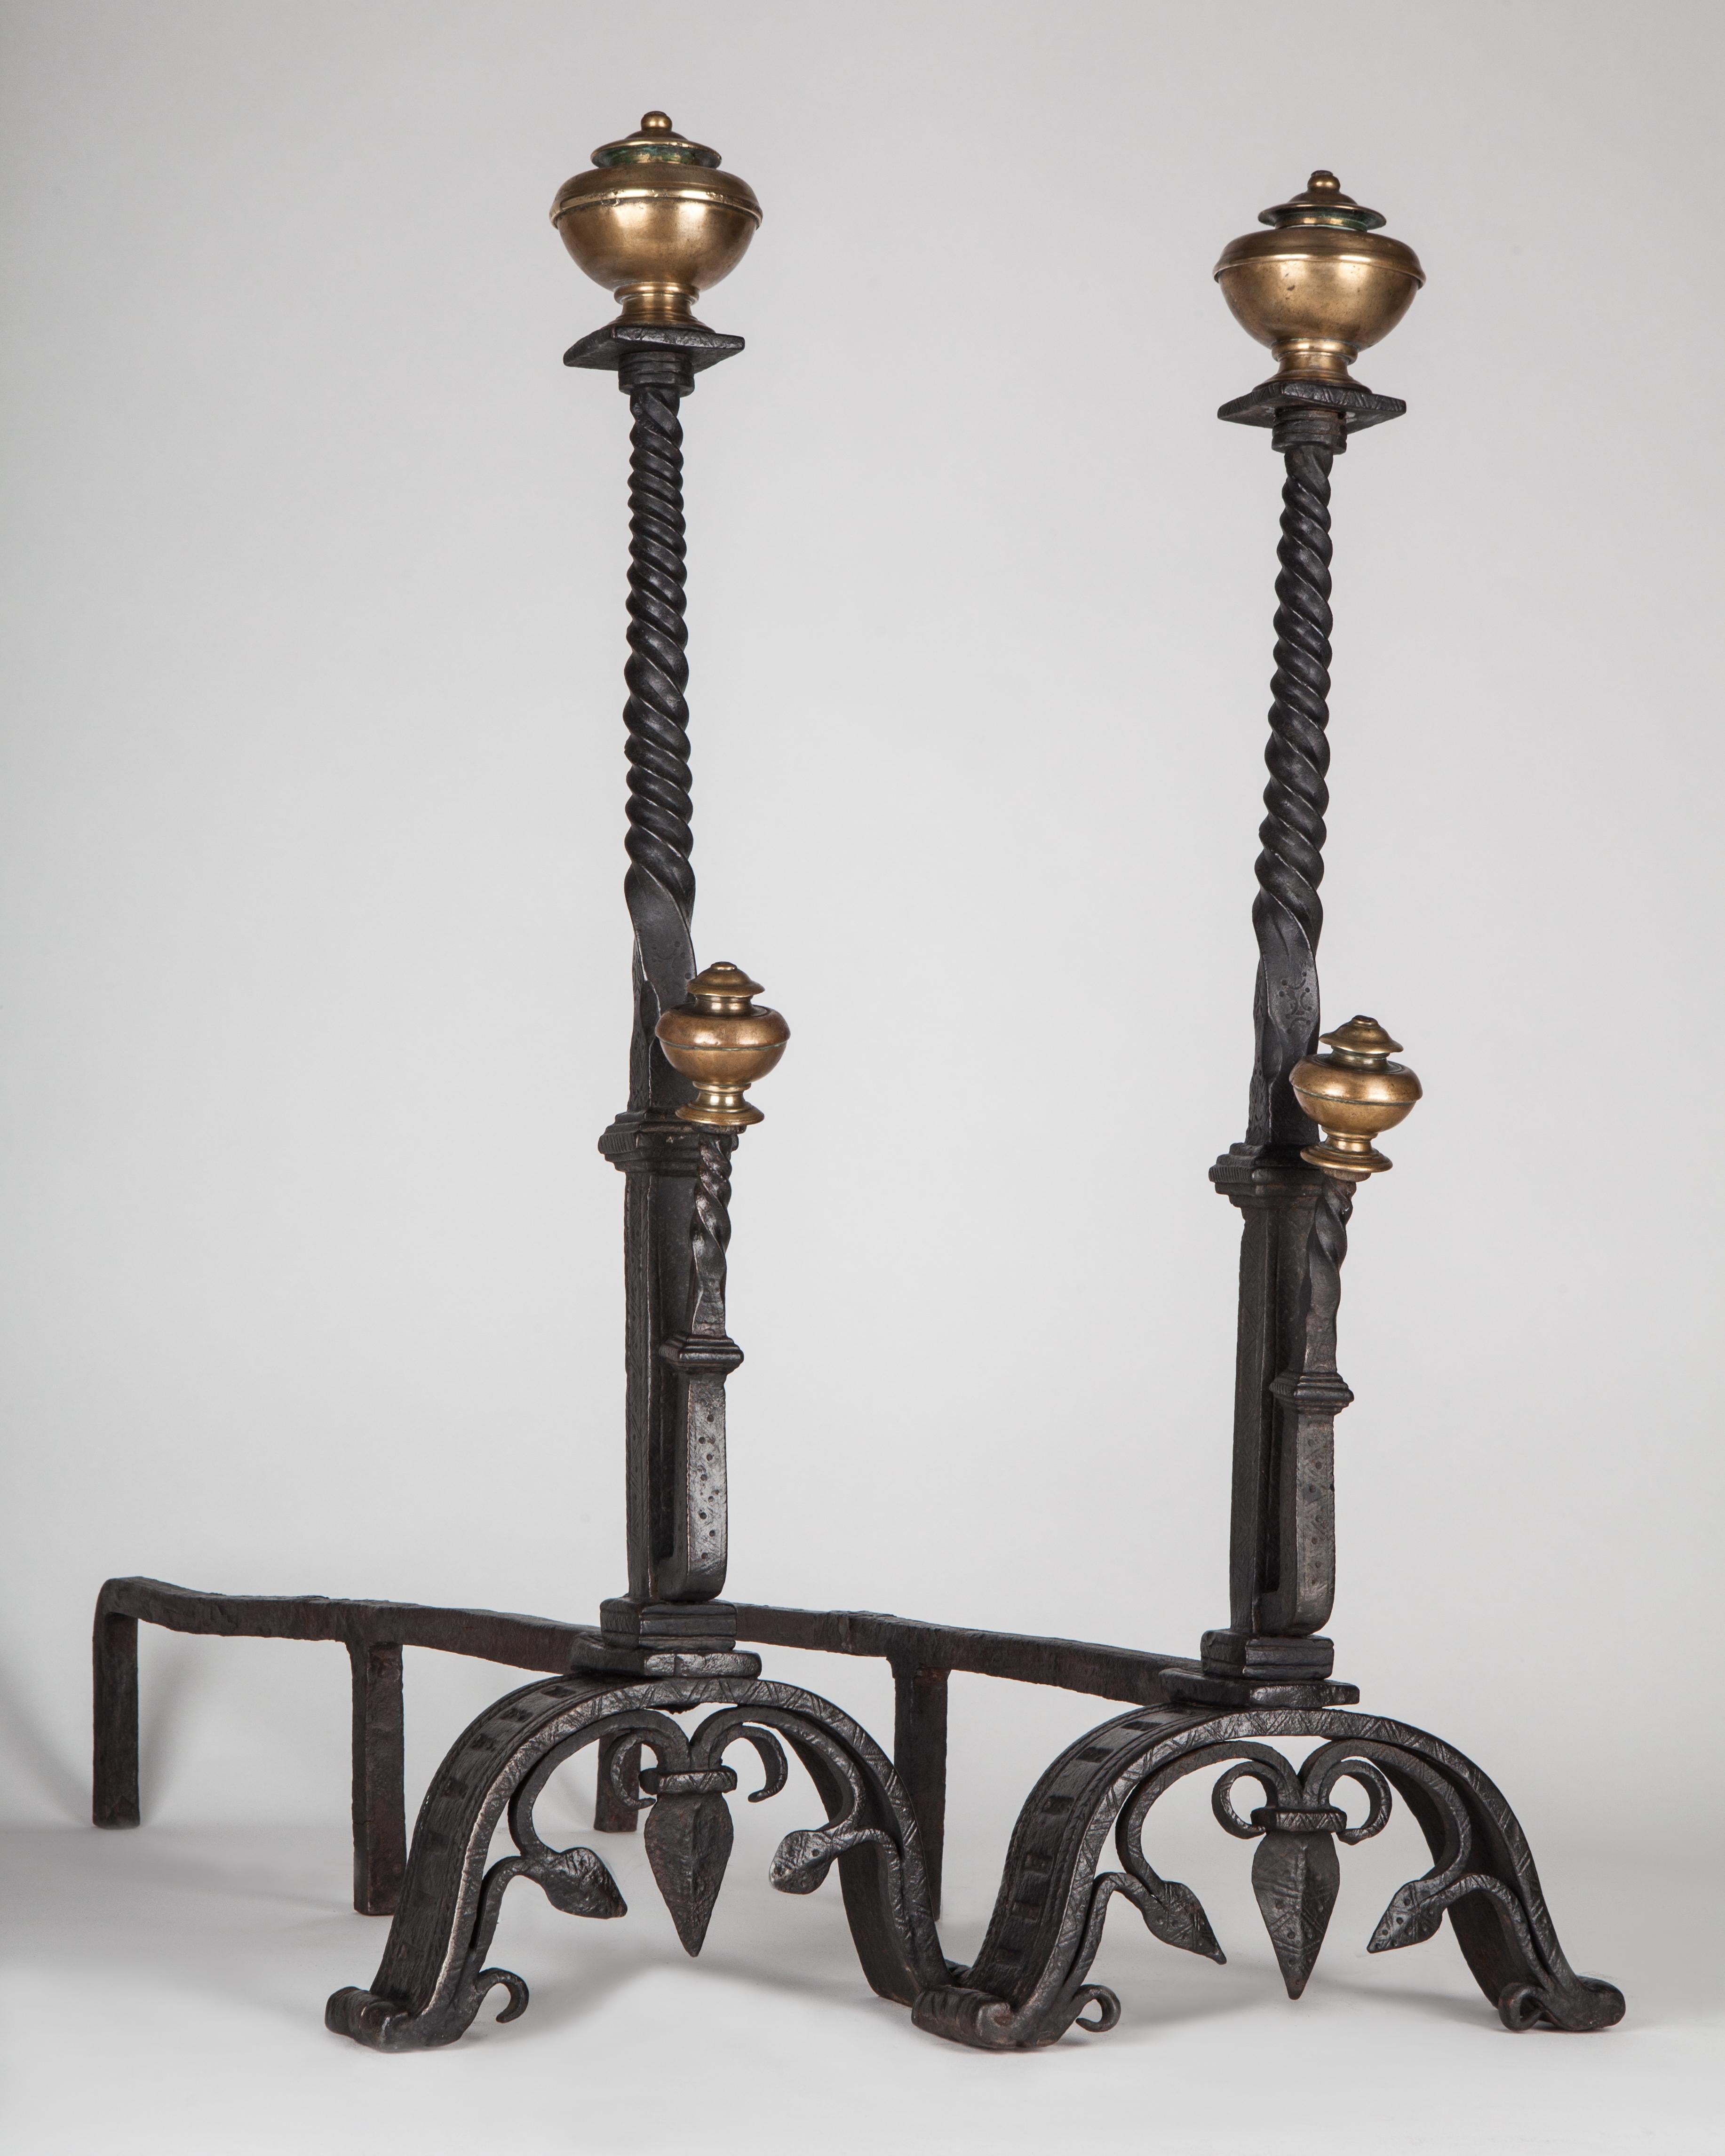 AFP0603
A pair of antique wrought iron andirons with twisted shafts and scrolled feet, terminating in turned aged brass finials. Circa 1920.

Dimensions:
Overall: 30-1/2